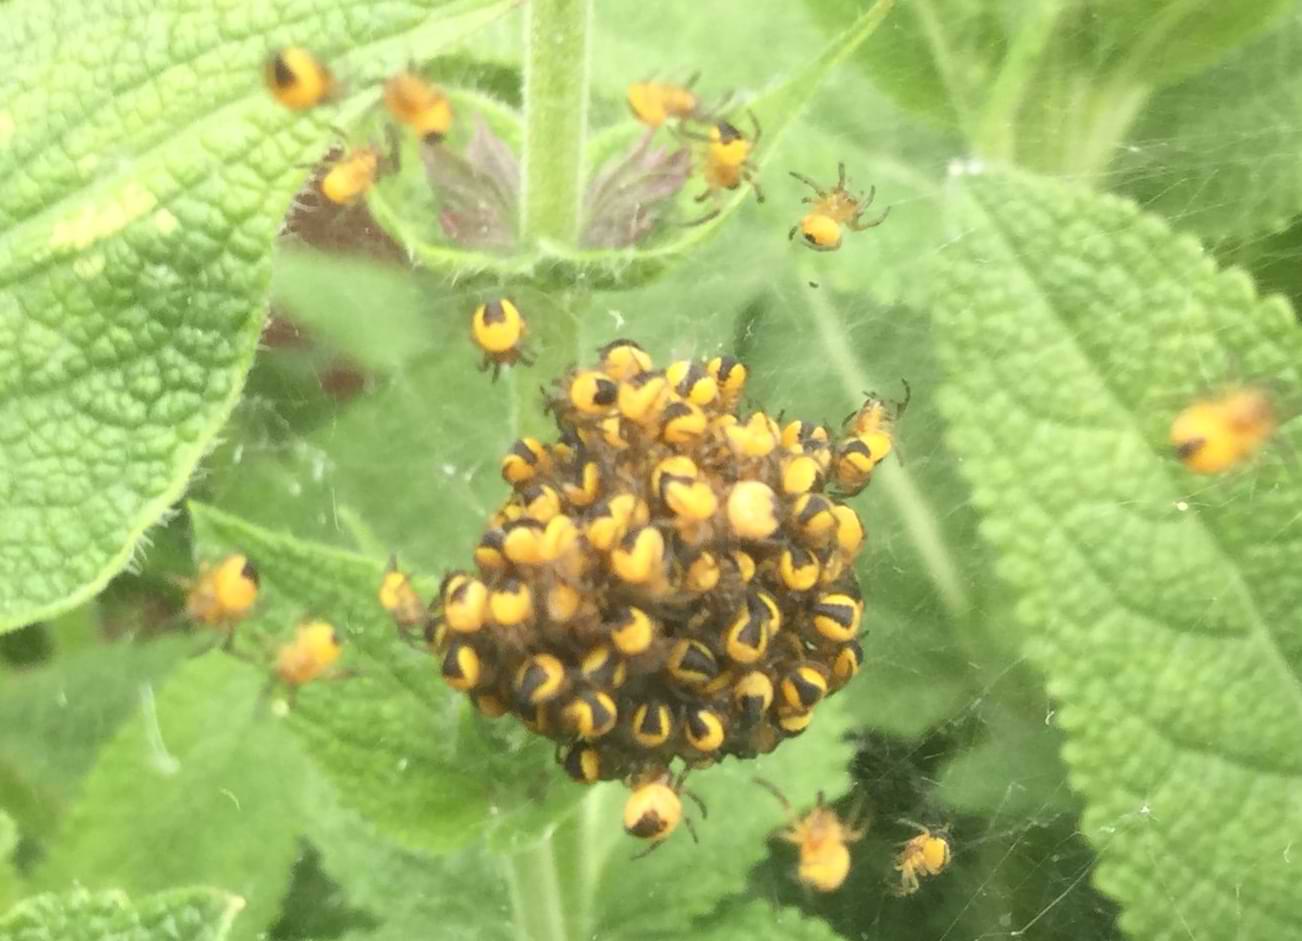 A large round cluster of tiny orange and black spiders near the stem of a plant. The plant is heavily blanketed in webs.